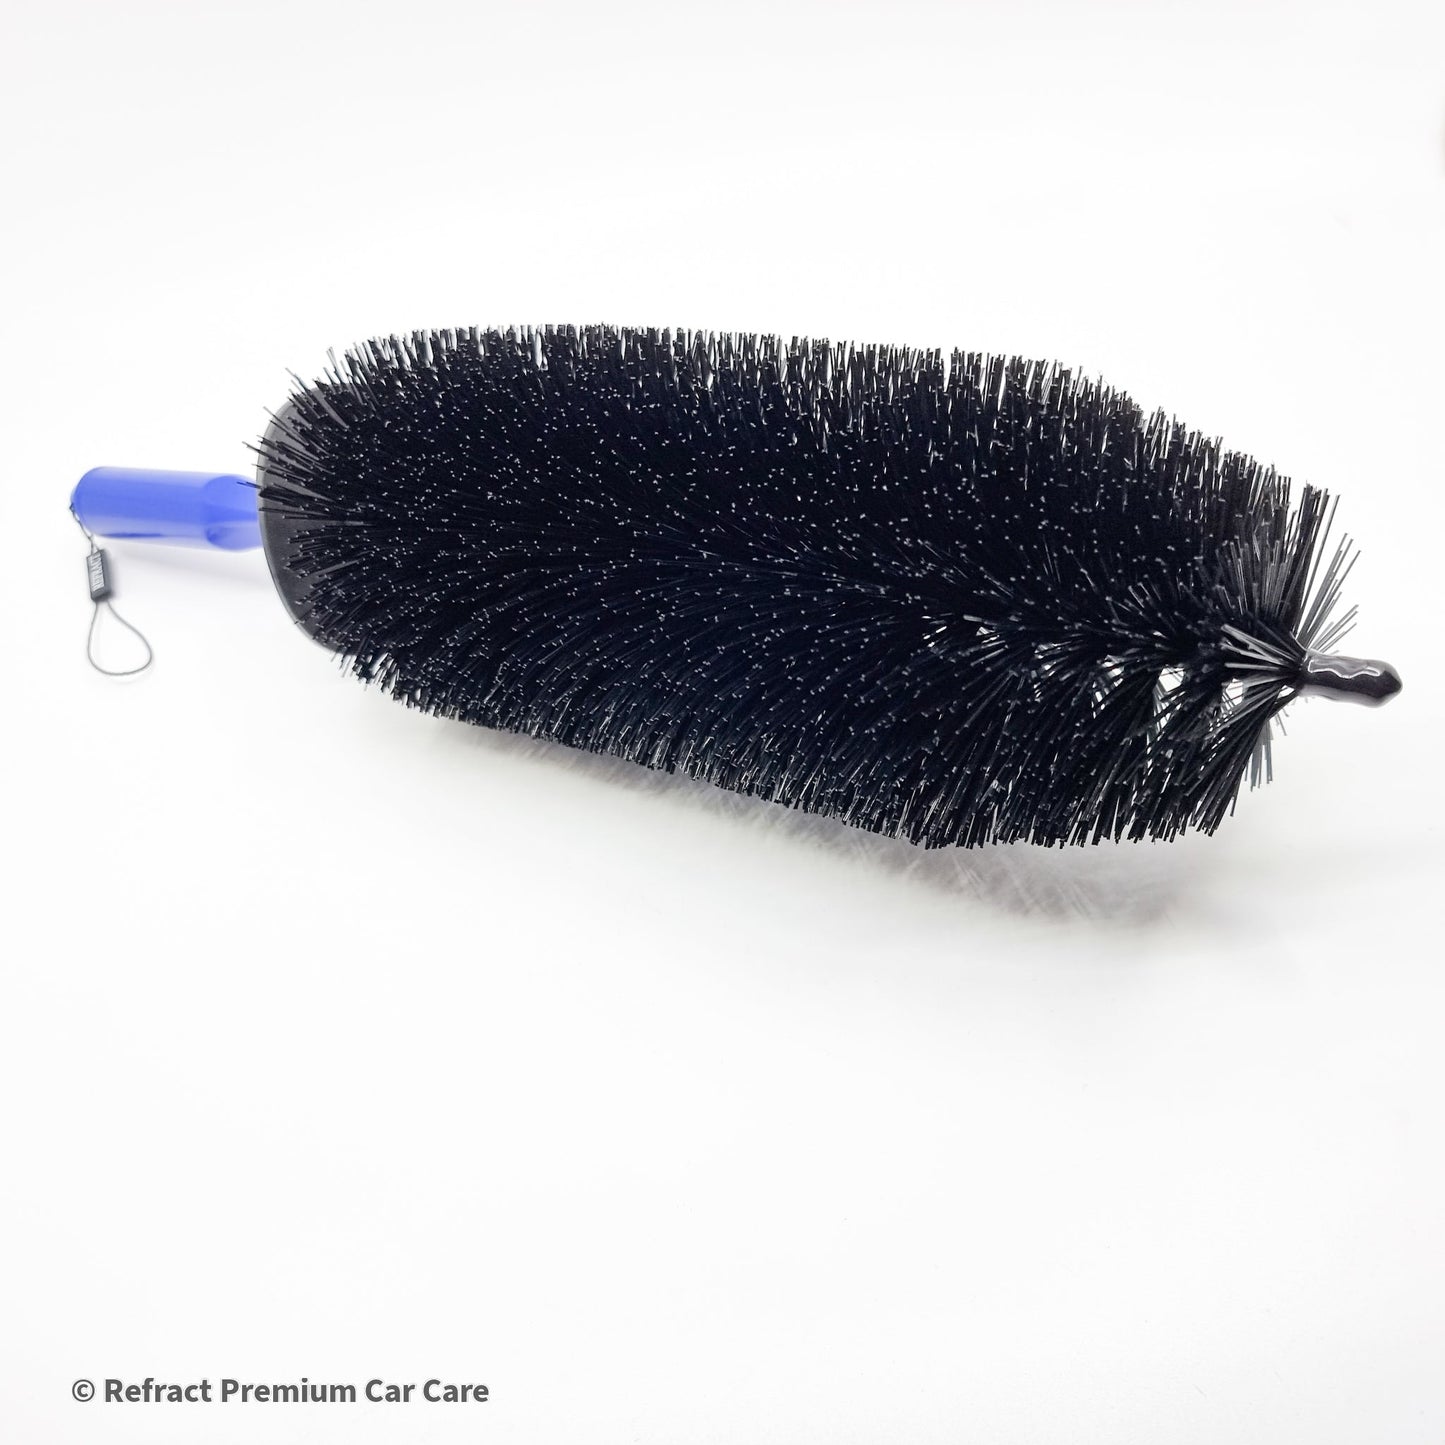 Refract Premium Car Care Products Refract Wheel Cleaning Bristle Brush $9.95